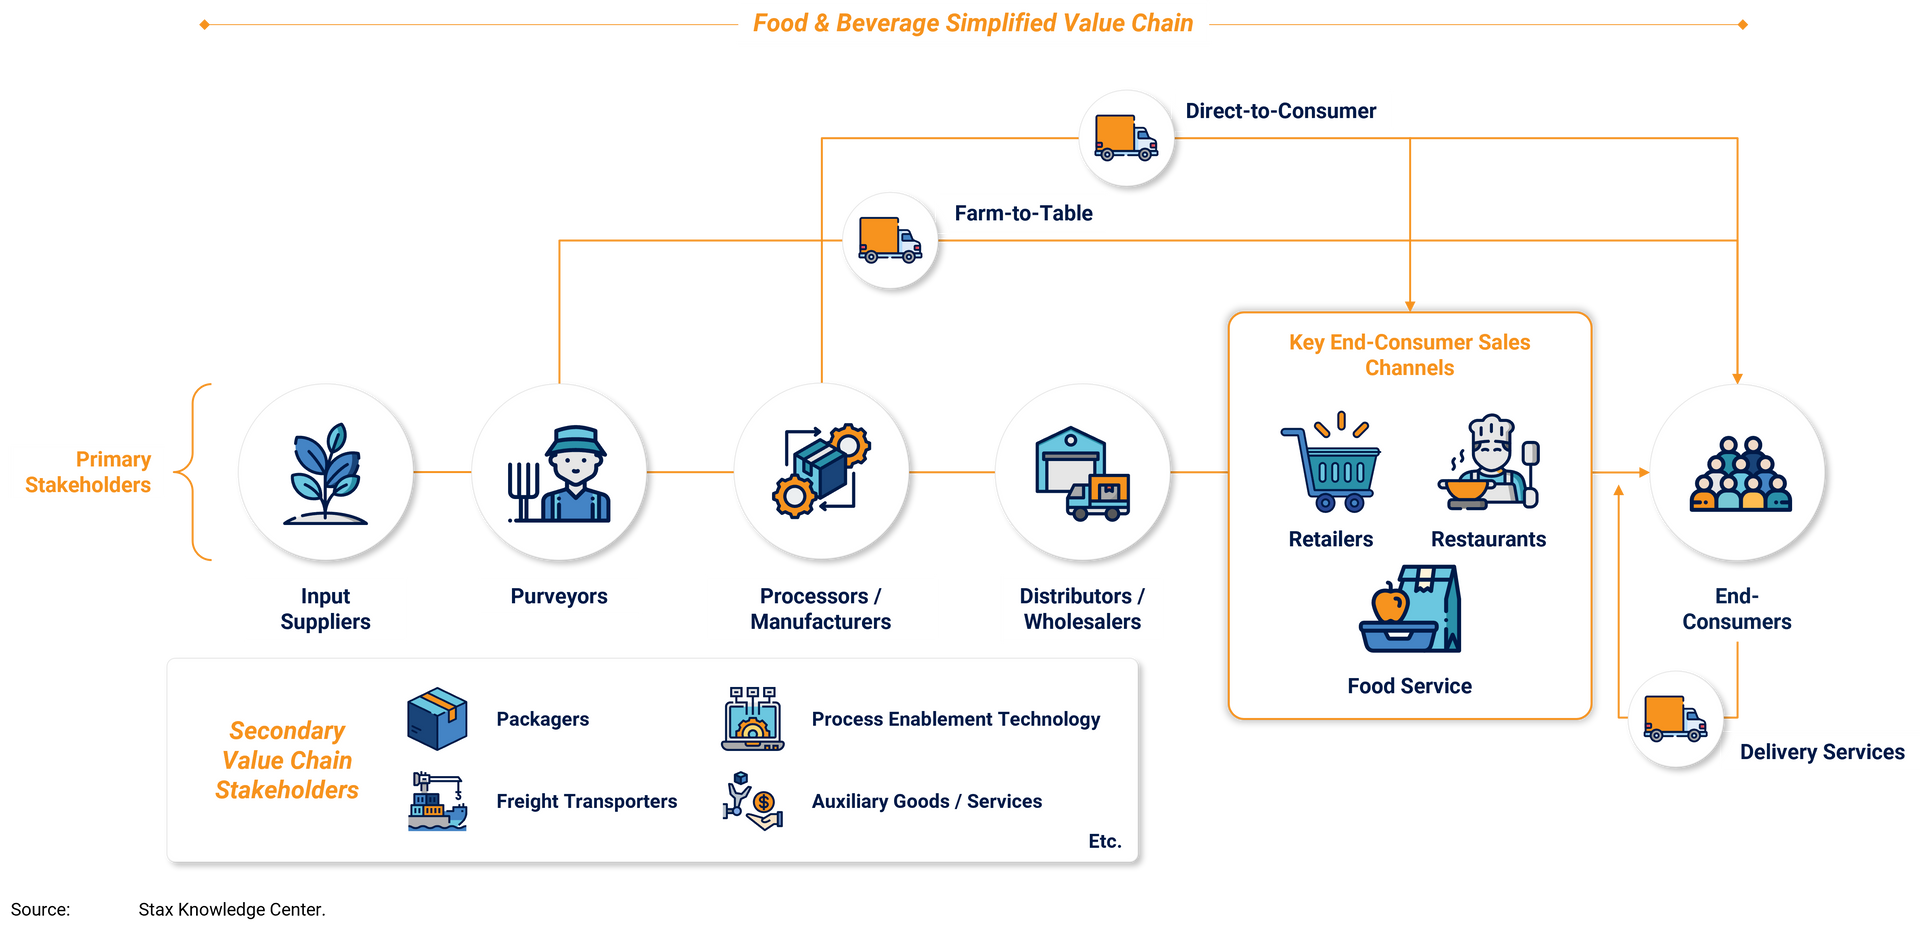 A graph displaying the simplified value chain for Food & Beverage.